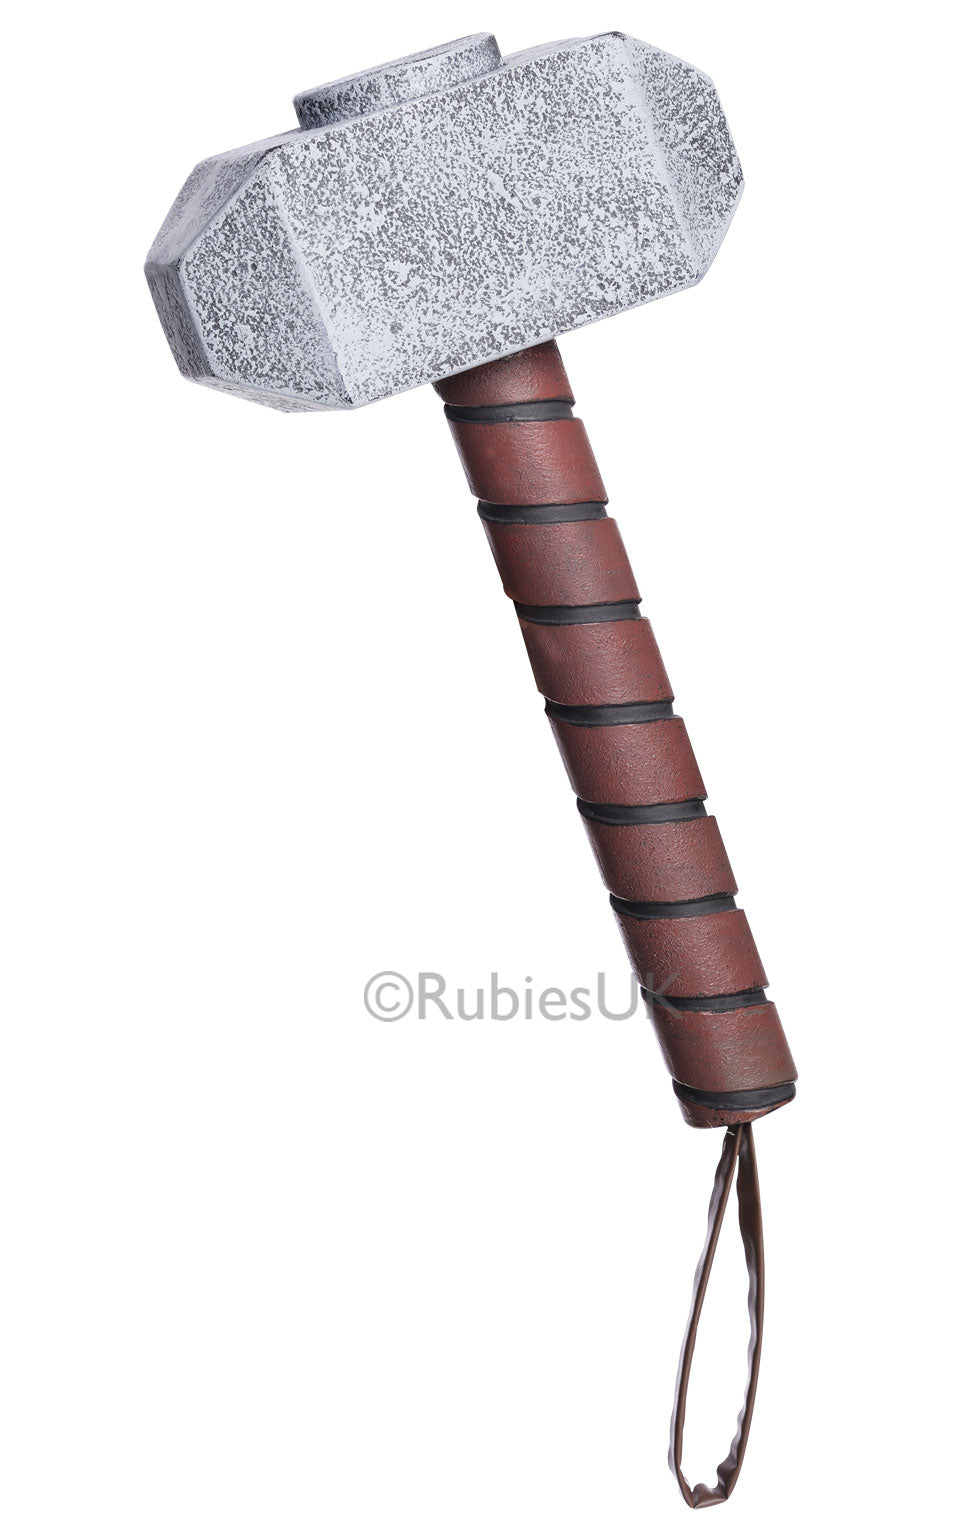 Adult's Thor Hammer